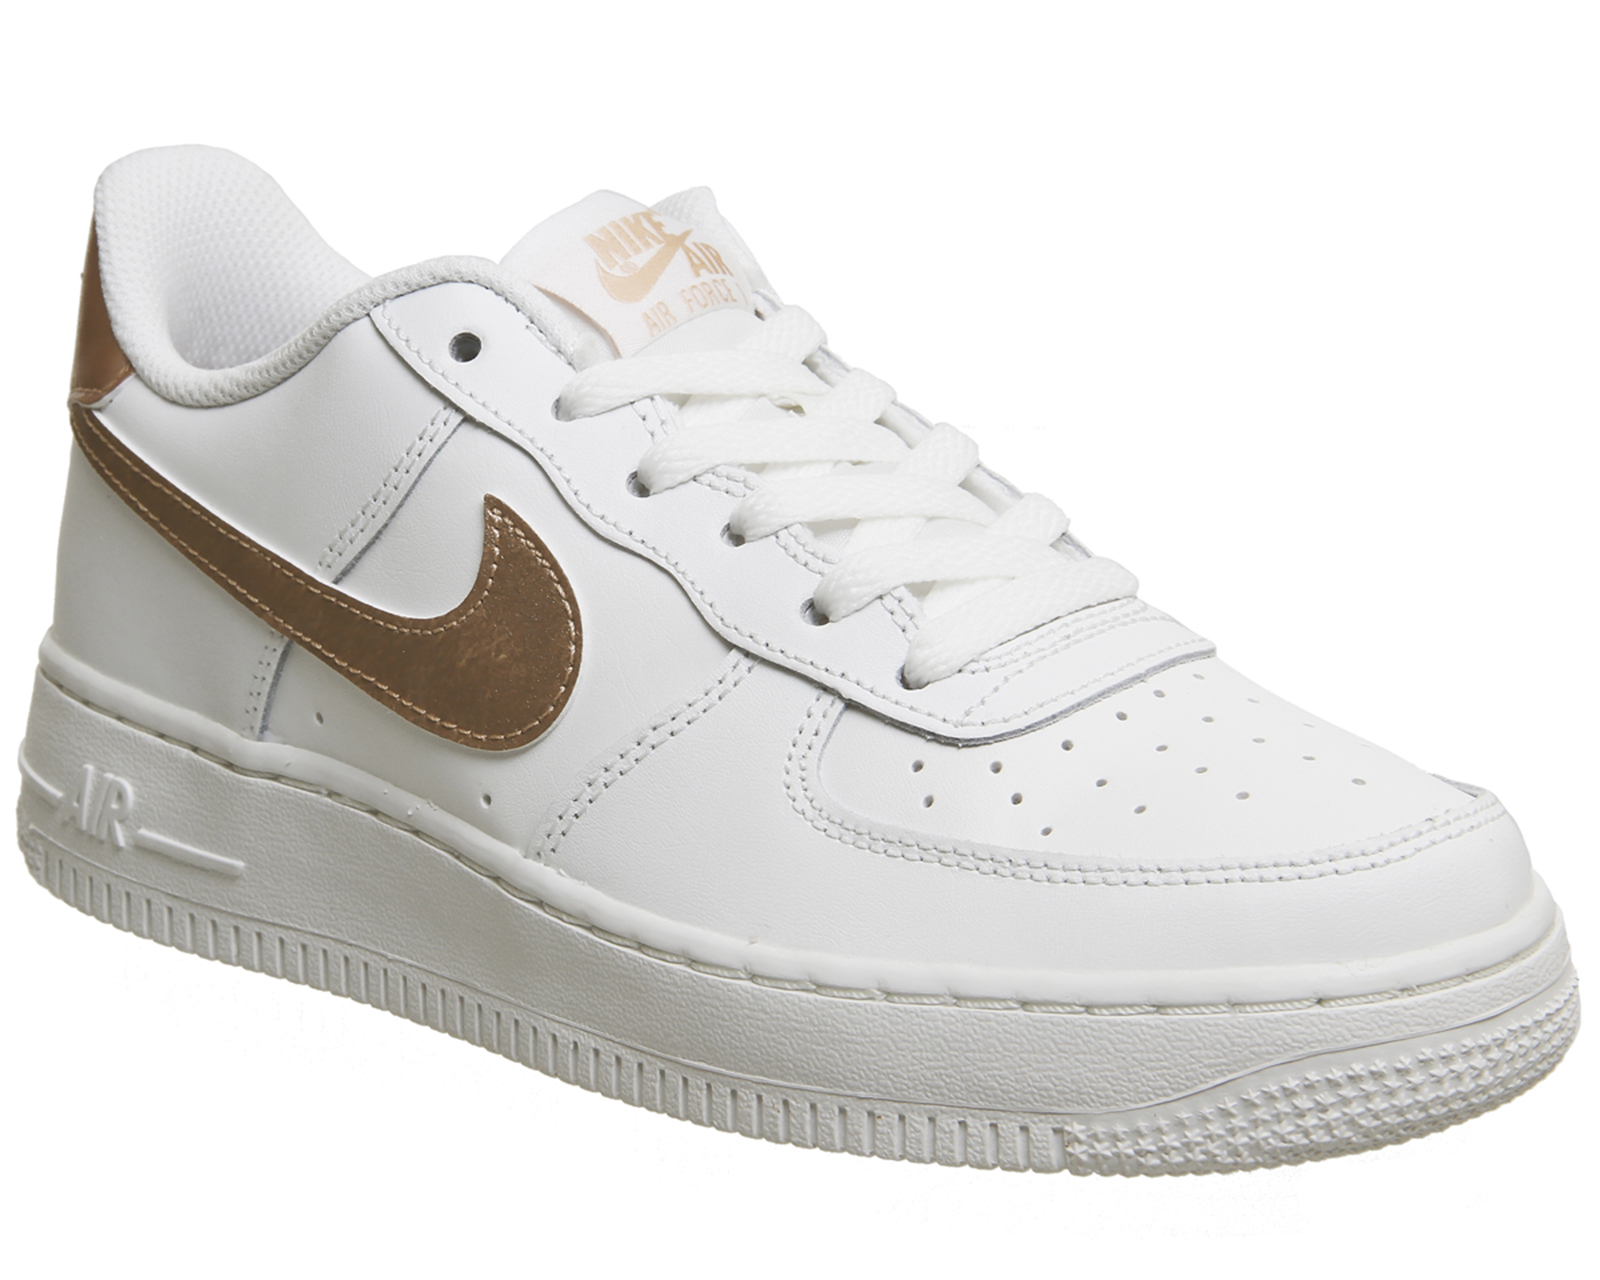 Nike Air Force 1 Trainers White Metallic Rose Gold - Hers trainers